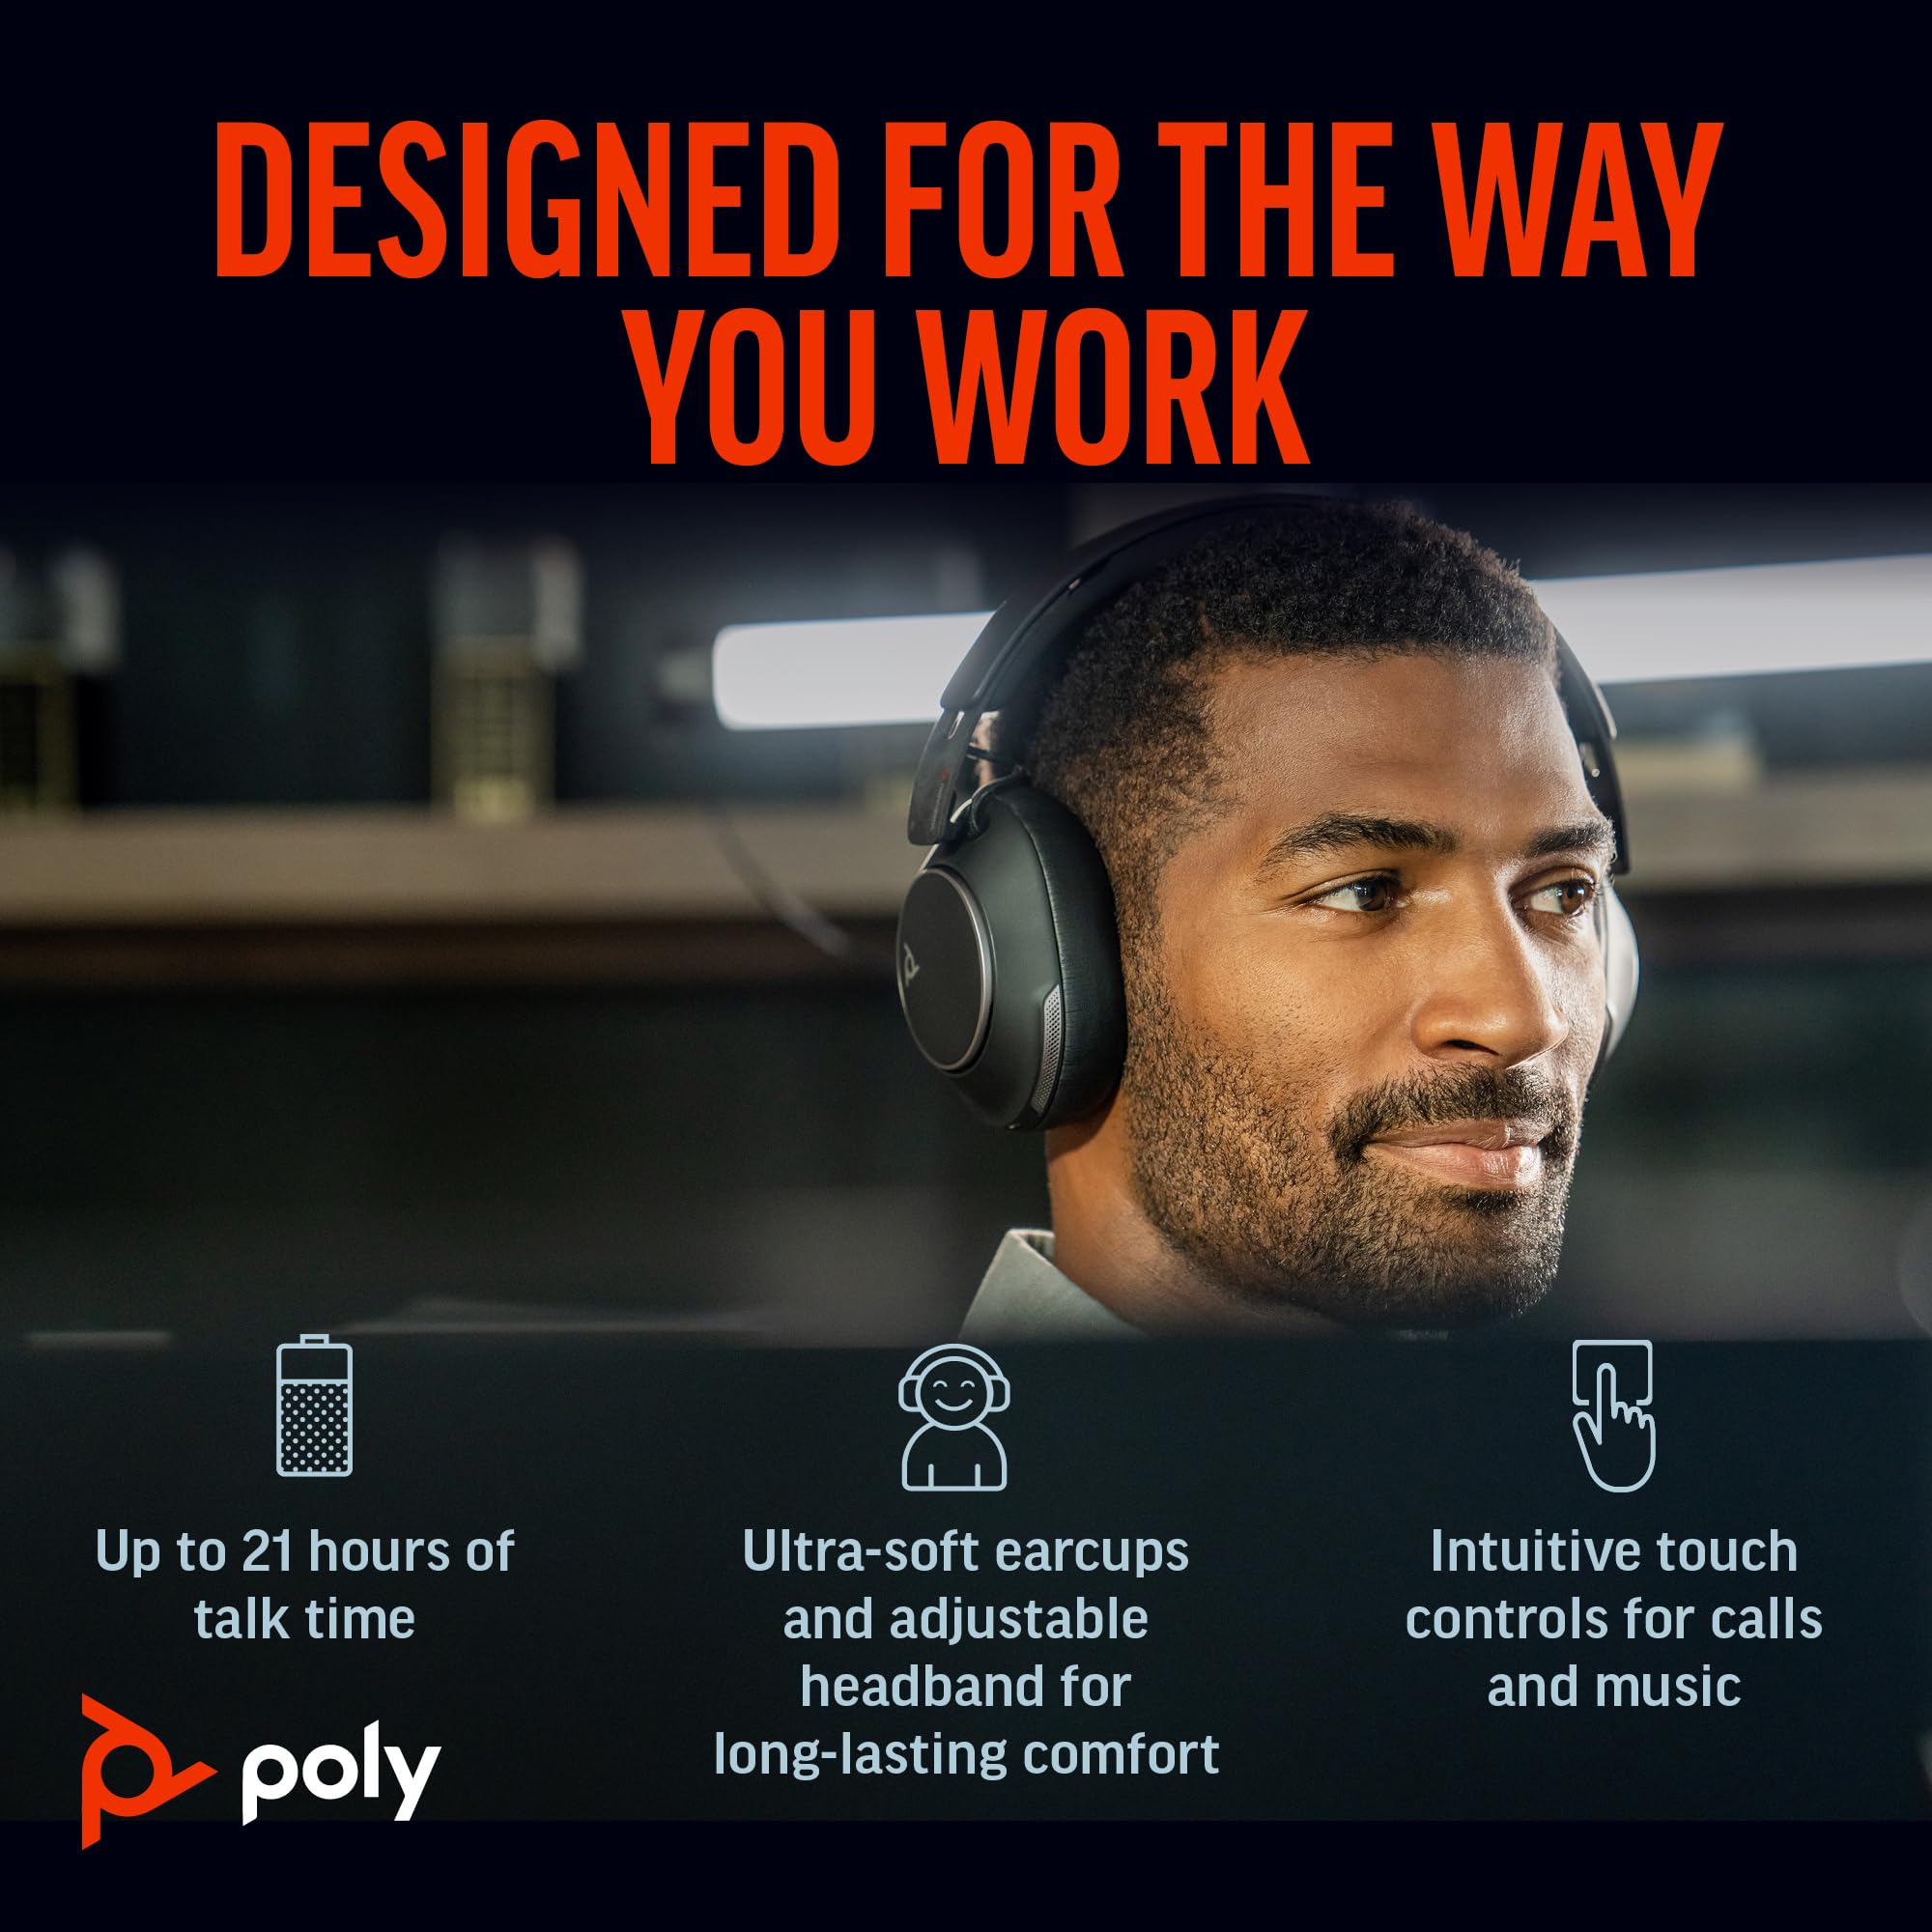 Poly Voyager Surround 80 UC Bluetooth Headset (Plantronics) – Noise-Canceling Mics for Clear Calls – Adaptive ANC – Works w/iPhone, Android, PC/Mac, Zoom, Microsoft Teams (Certified) –Amazon Exclusive